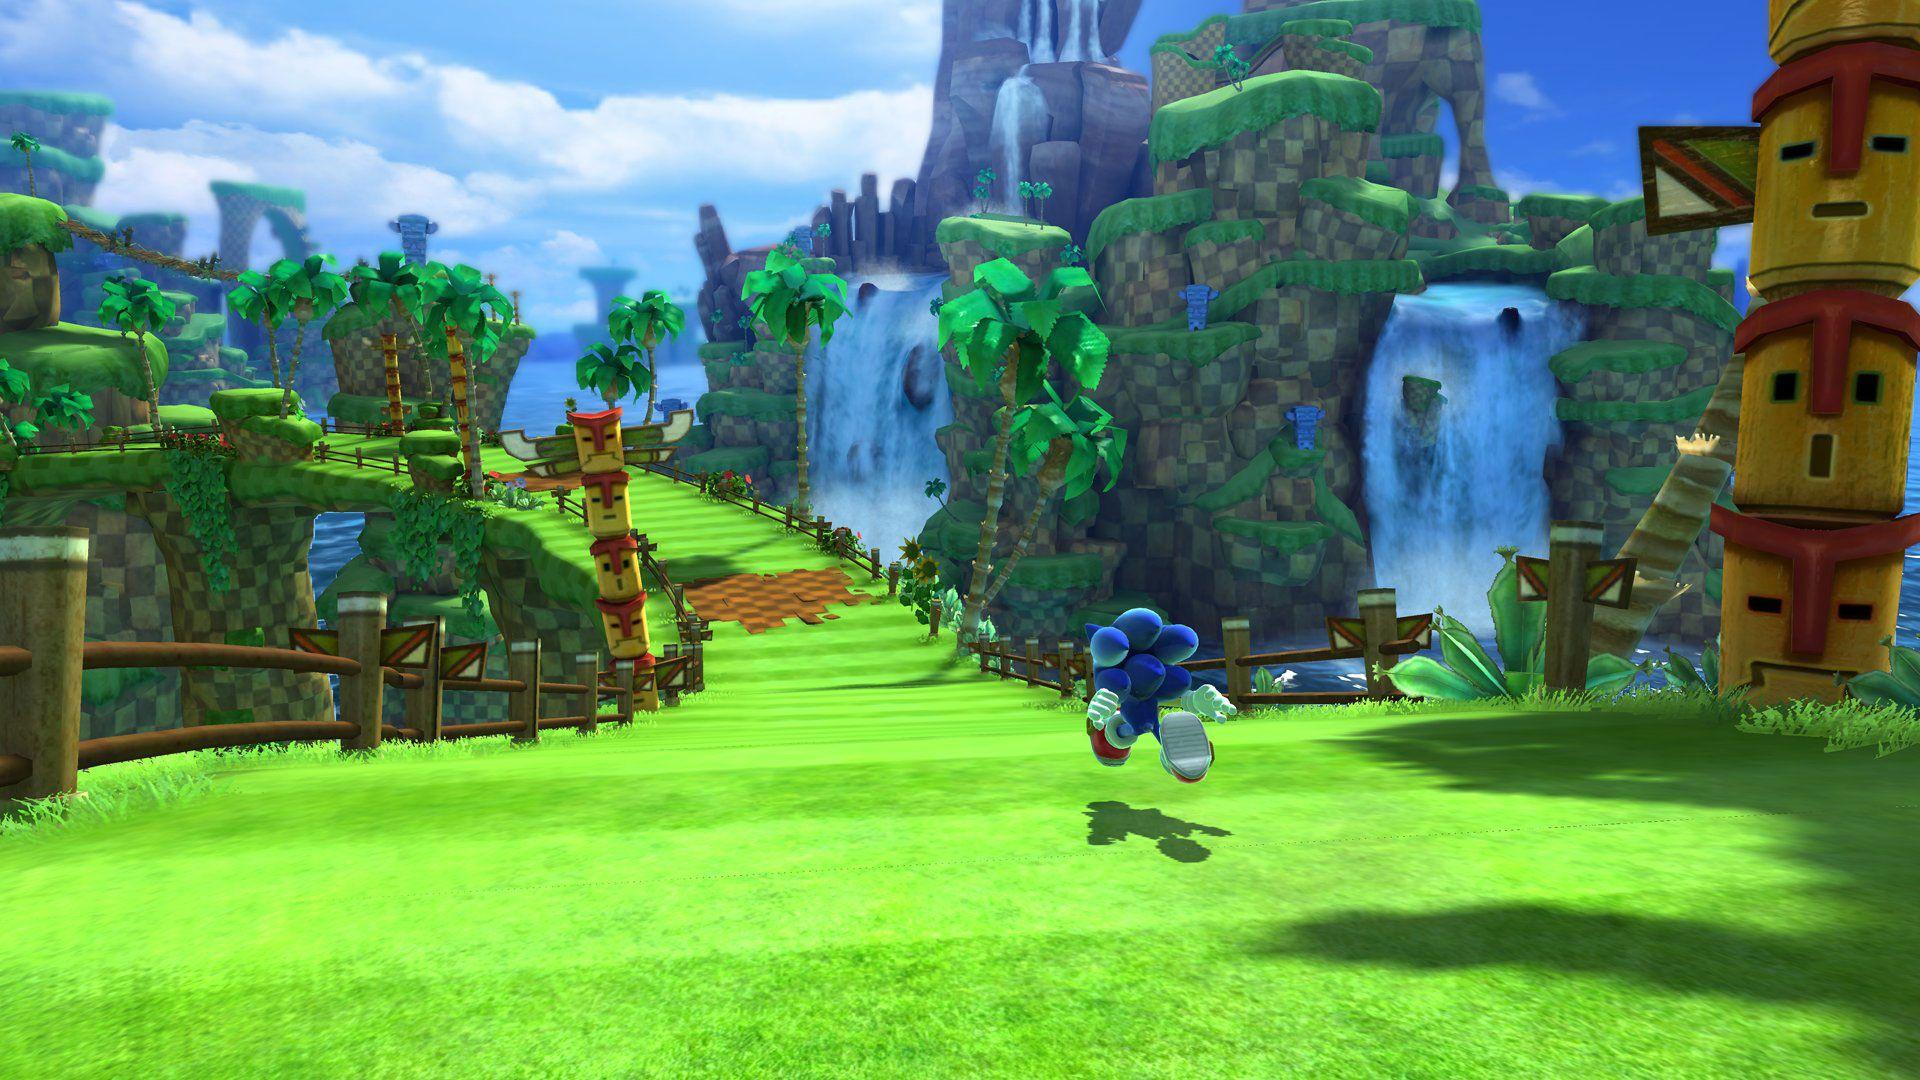 Green Hill Zone Wallpapers - Top Free Green Hill Zone Backgrounds